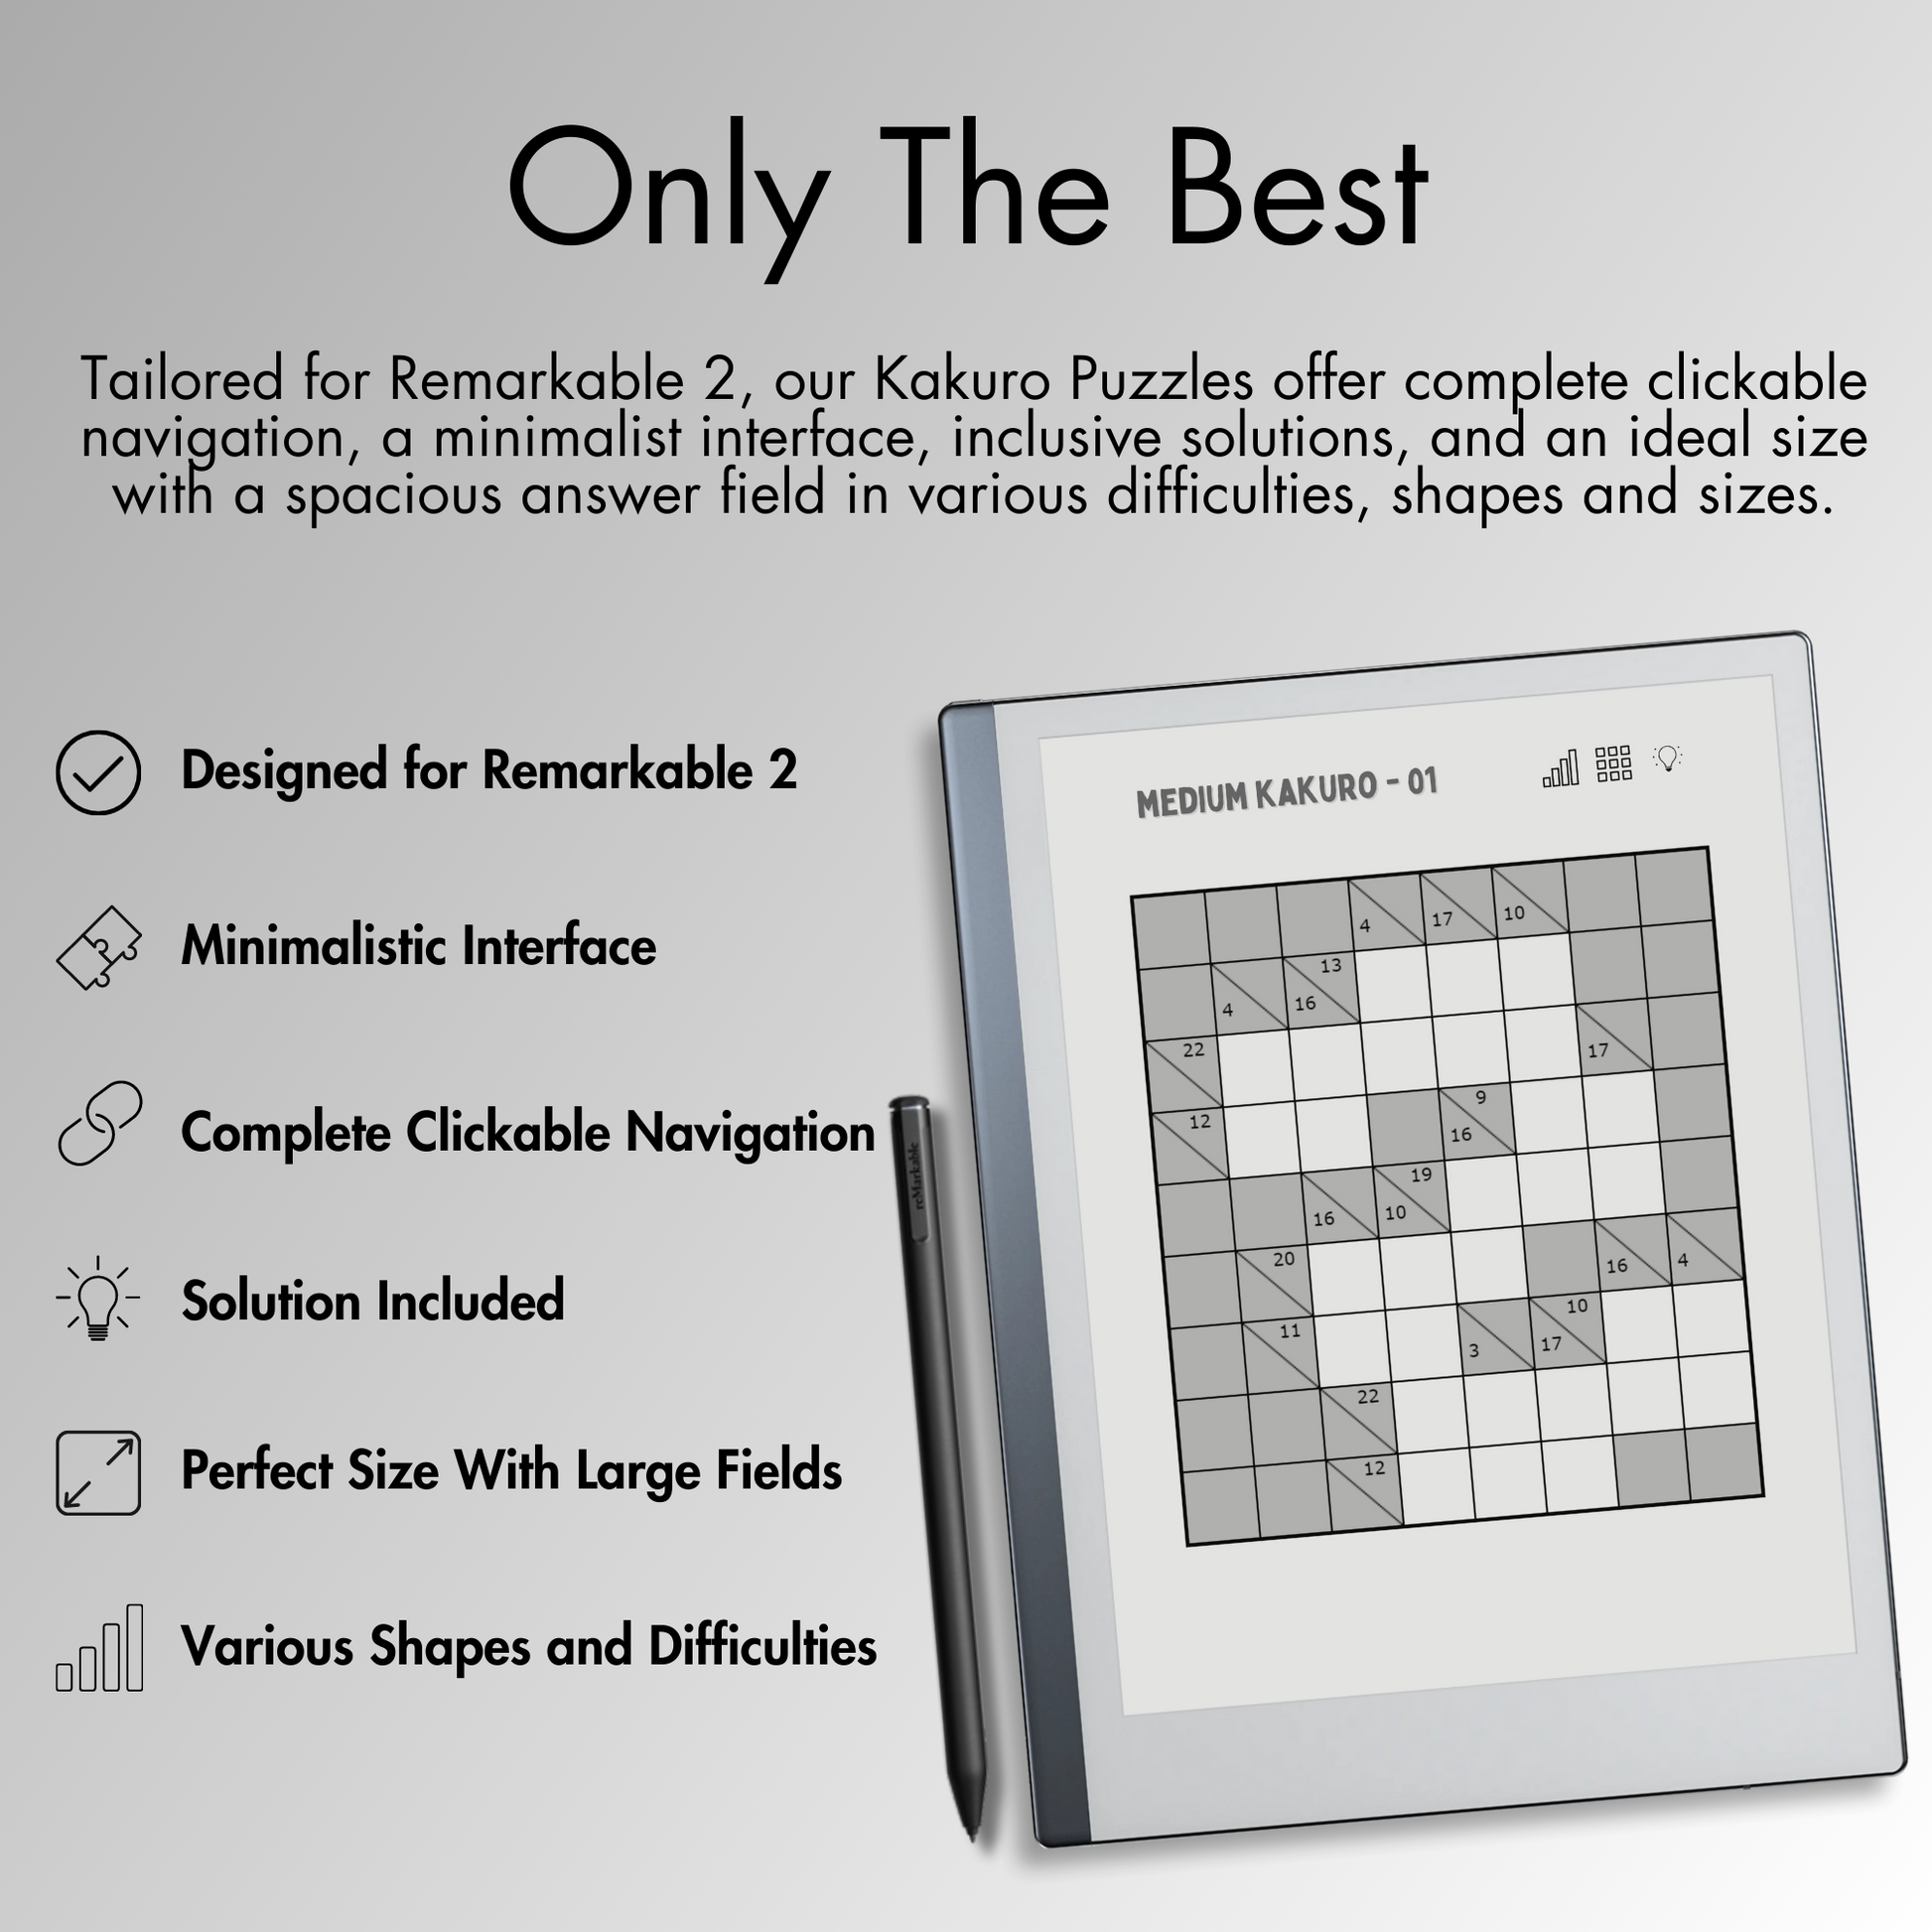 Our Kakuro Puzzles offer complete clickable navigation, a minimalist interface, inclusive solutions, and an ideal size with a spacious answer field for Remarkable 2 E-Ink screen.